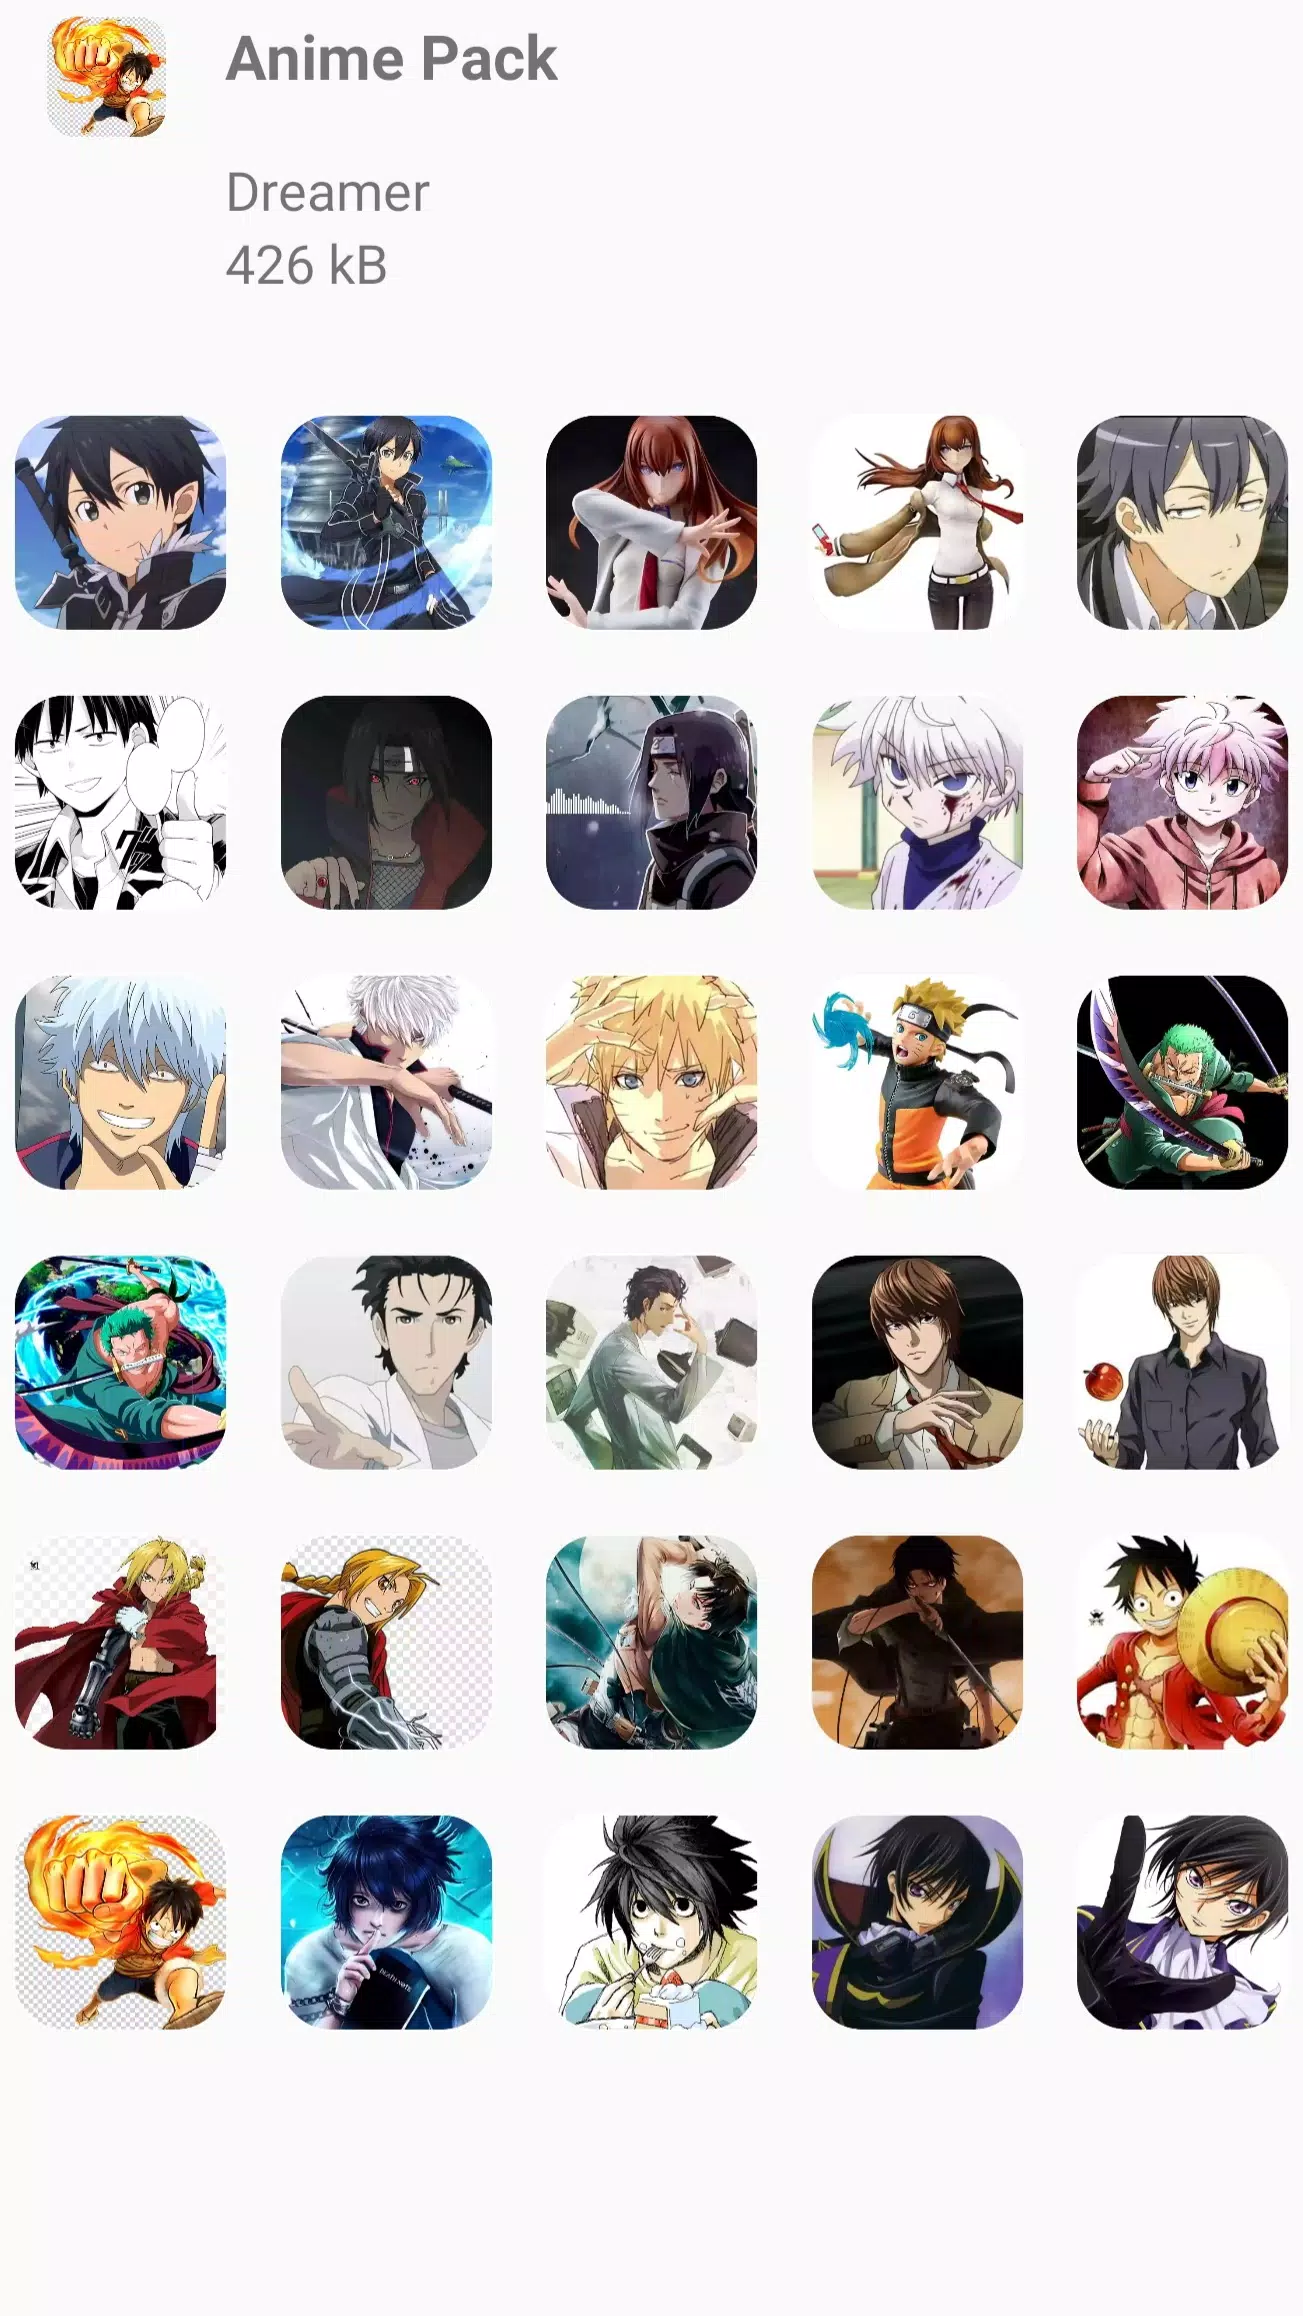 999K Anime Stickers WASticker - Apps on Google Play